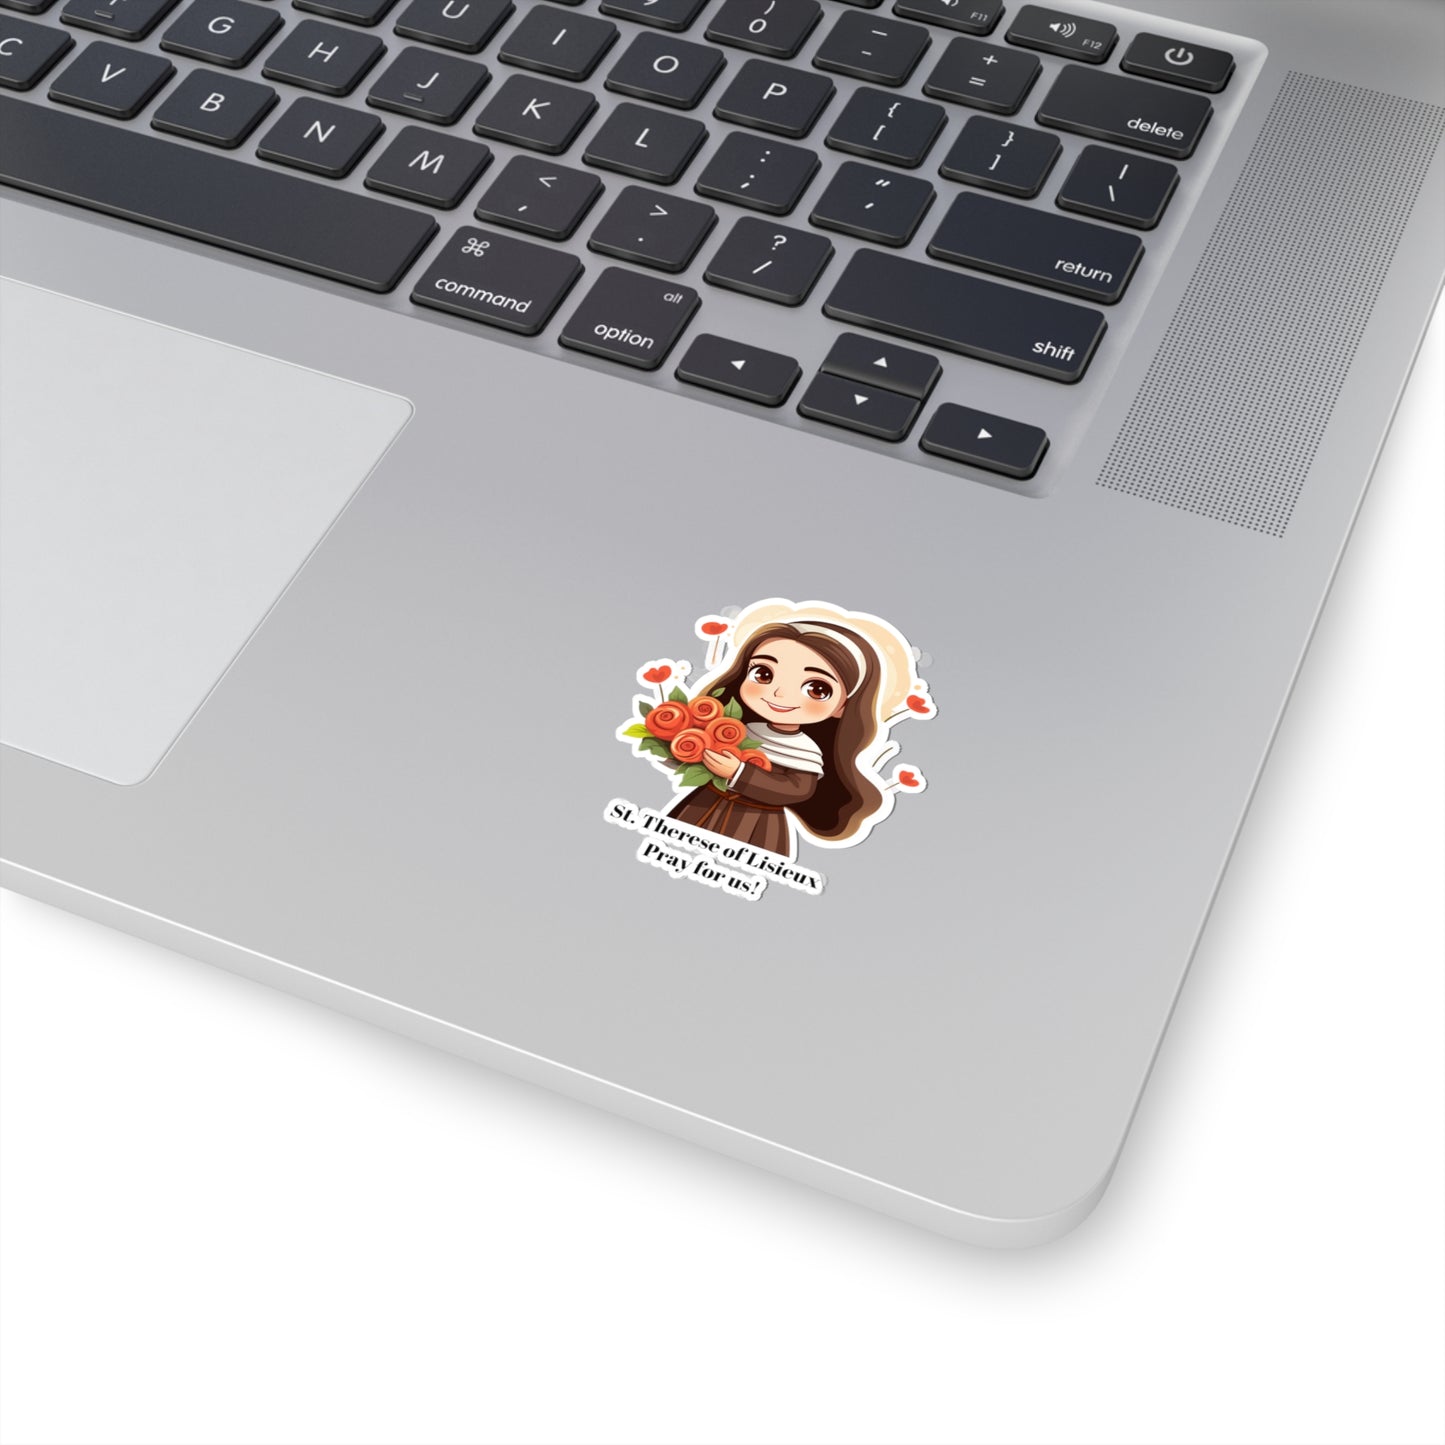 St. Therese of Lisieux Pray for us, sticker